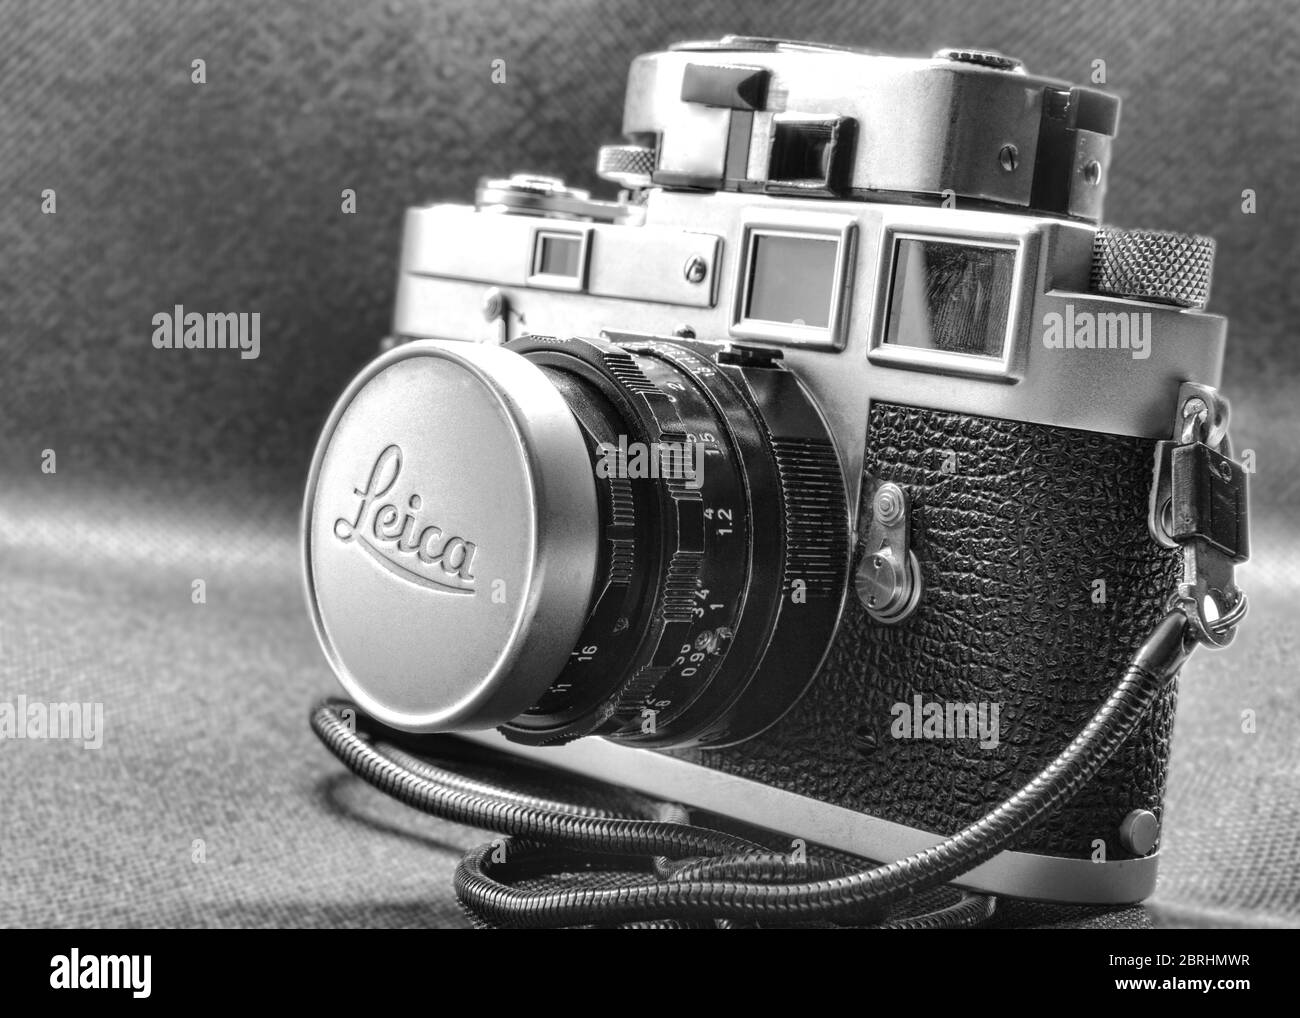 Rome,Italy - May 19, 2020: Retro design of used vintage mythic camera  Leica M2 with light-meter, Leica M2 is a 35 mm rangefinder camera by Ernst Leit Stock Photo